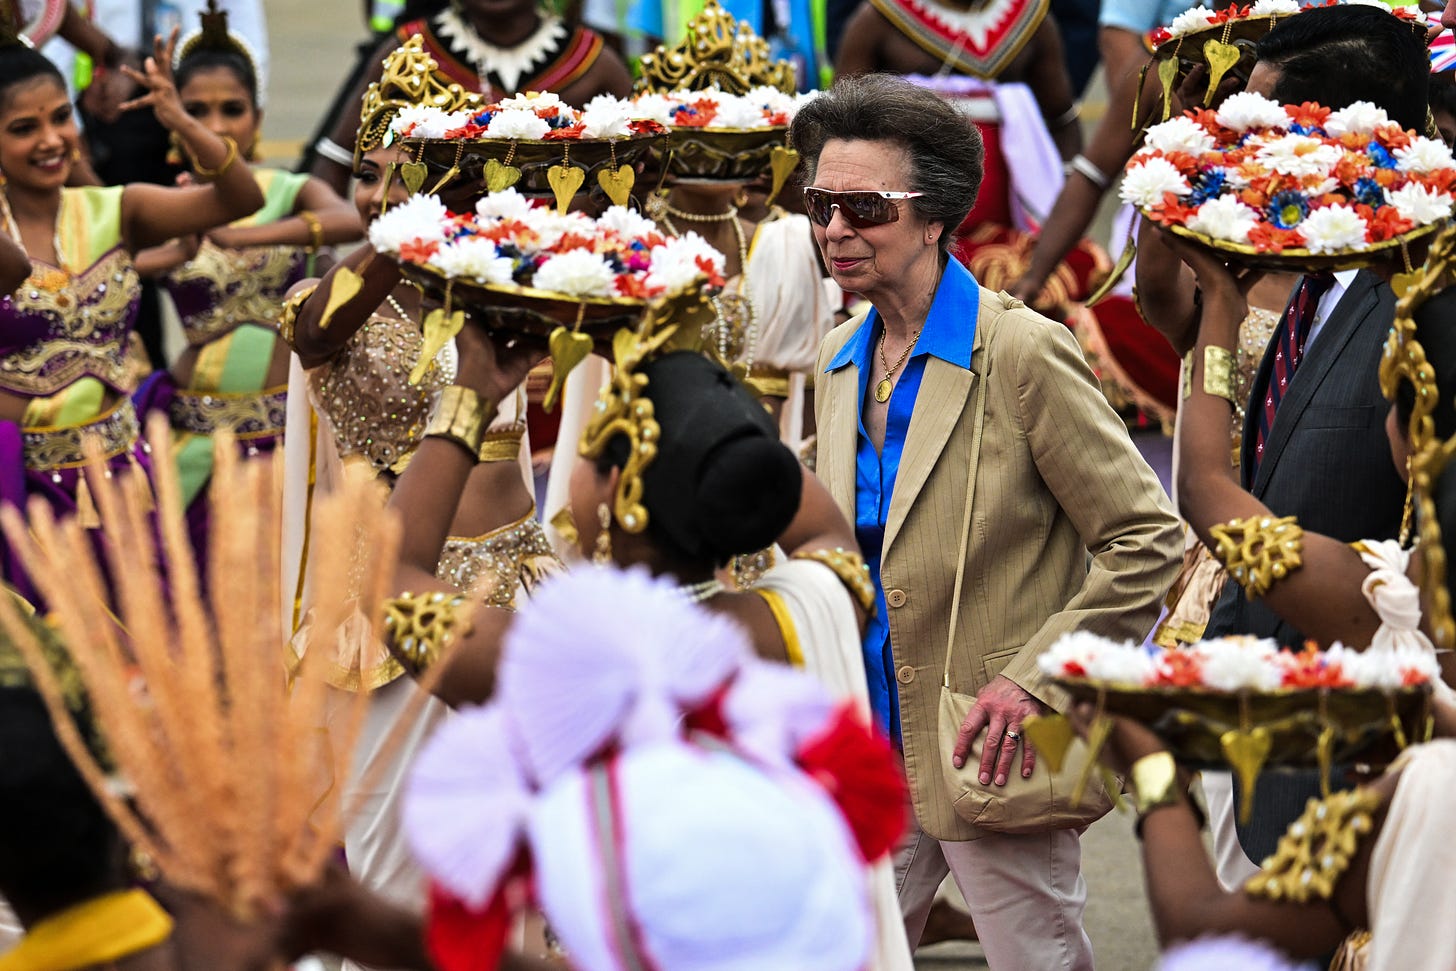 Princess Royal welcomed by traditional dancers in Sri Lanka